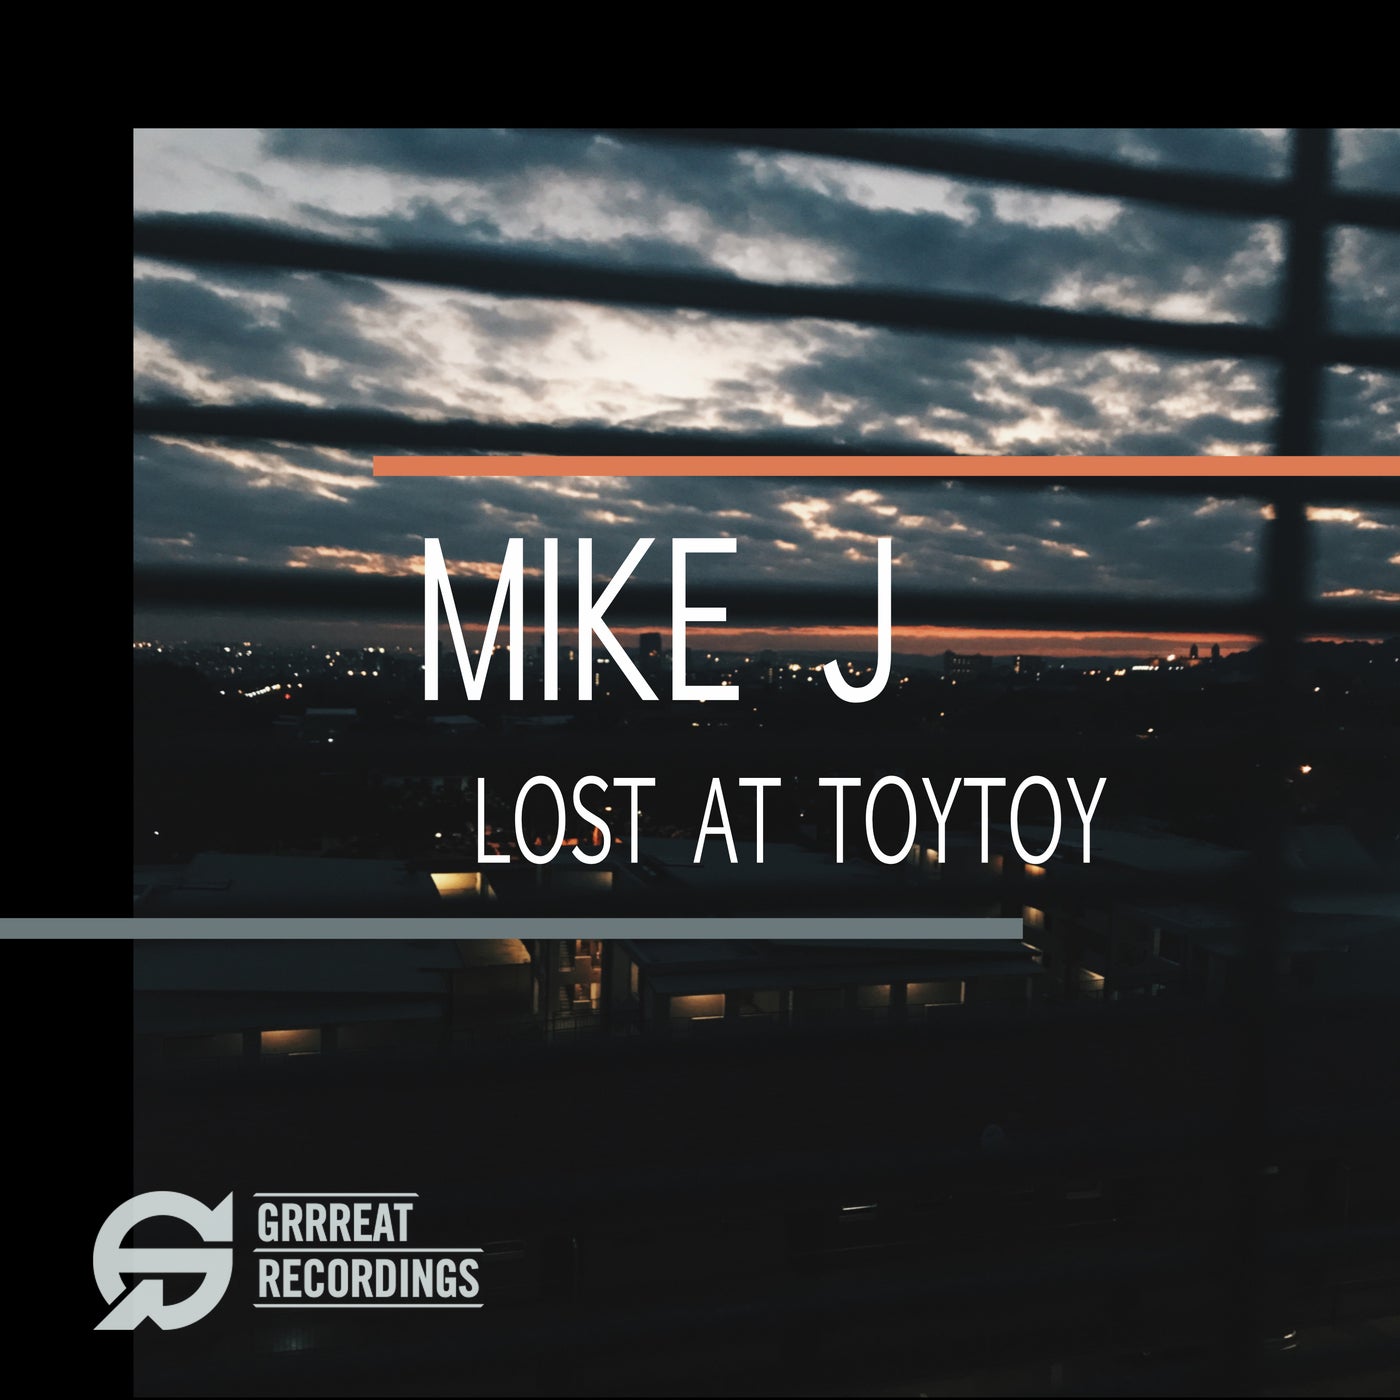 Lost at Toytoy